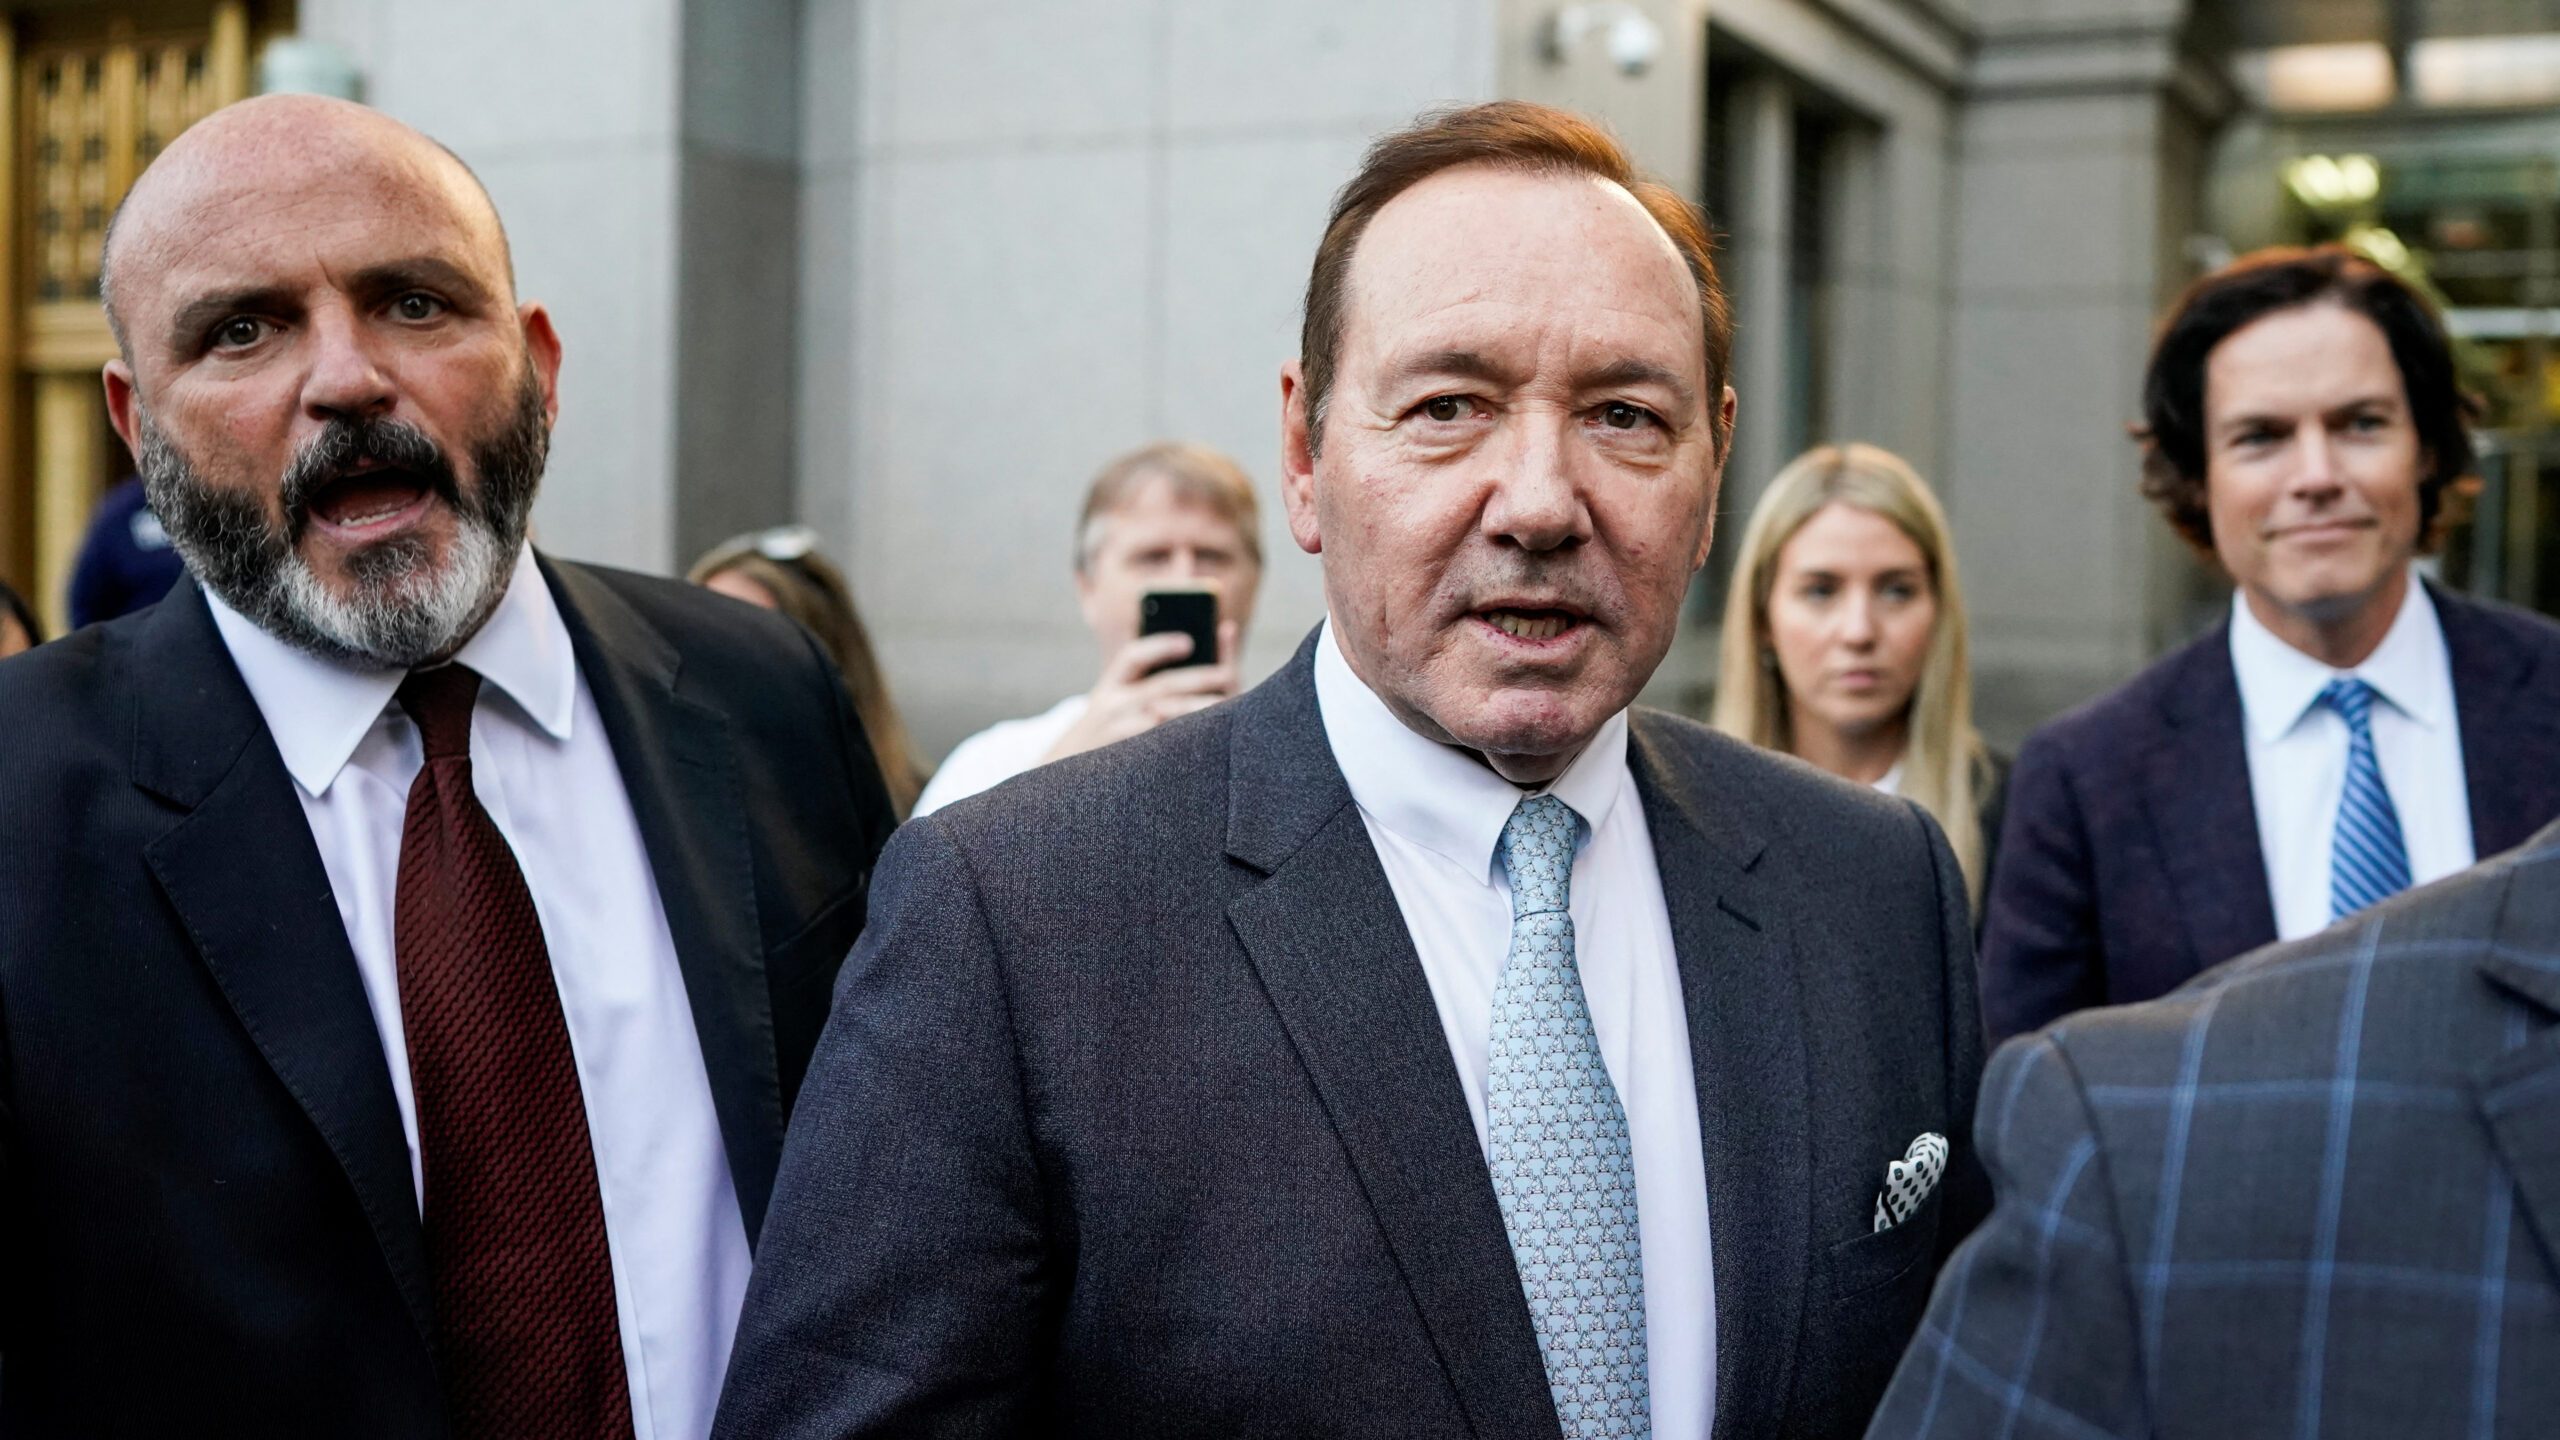 Kevin Spacey is not liable in civil sexual-abuse case brought by actor Anthony Rapp